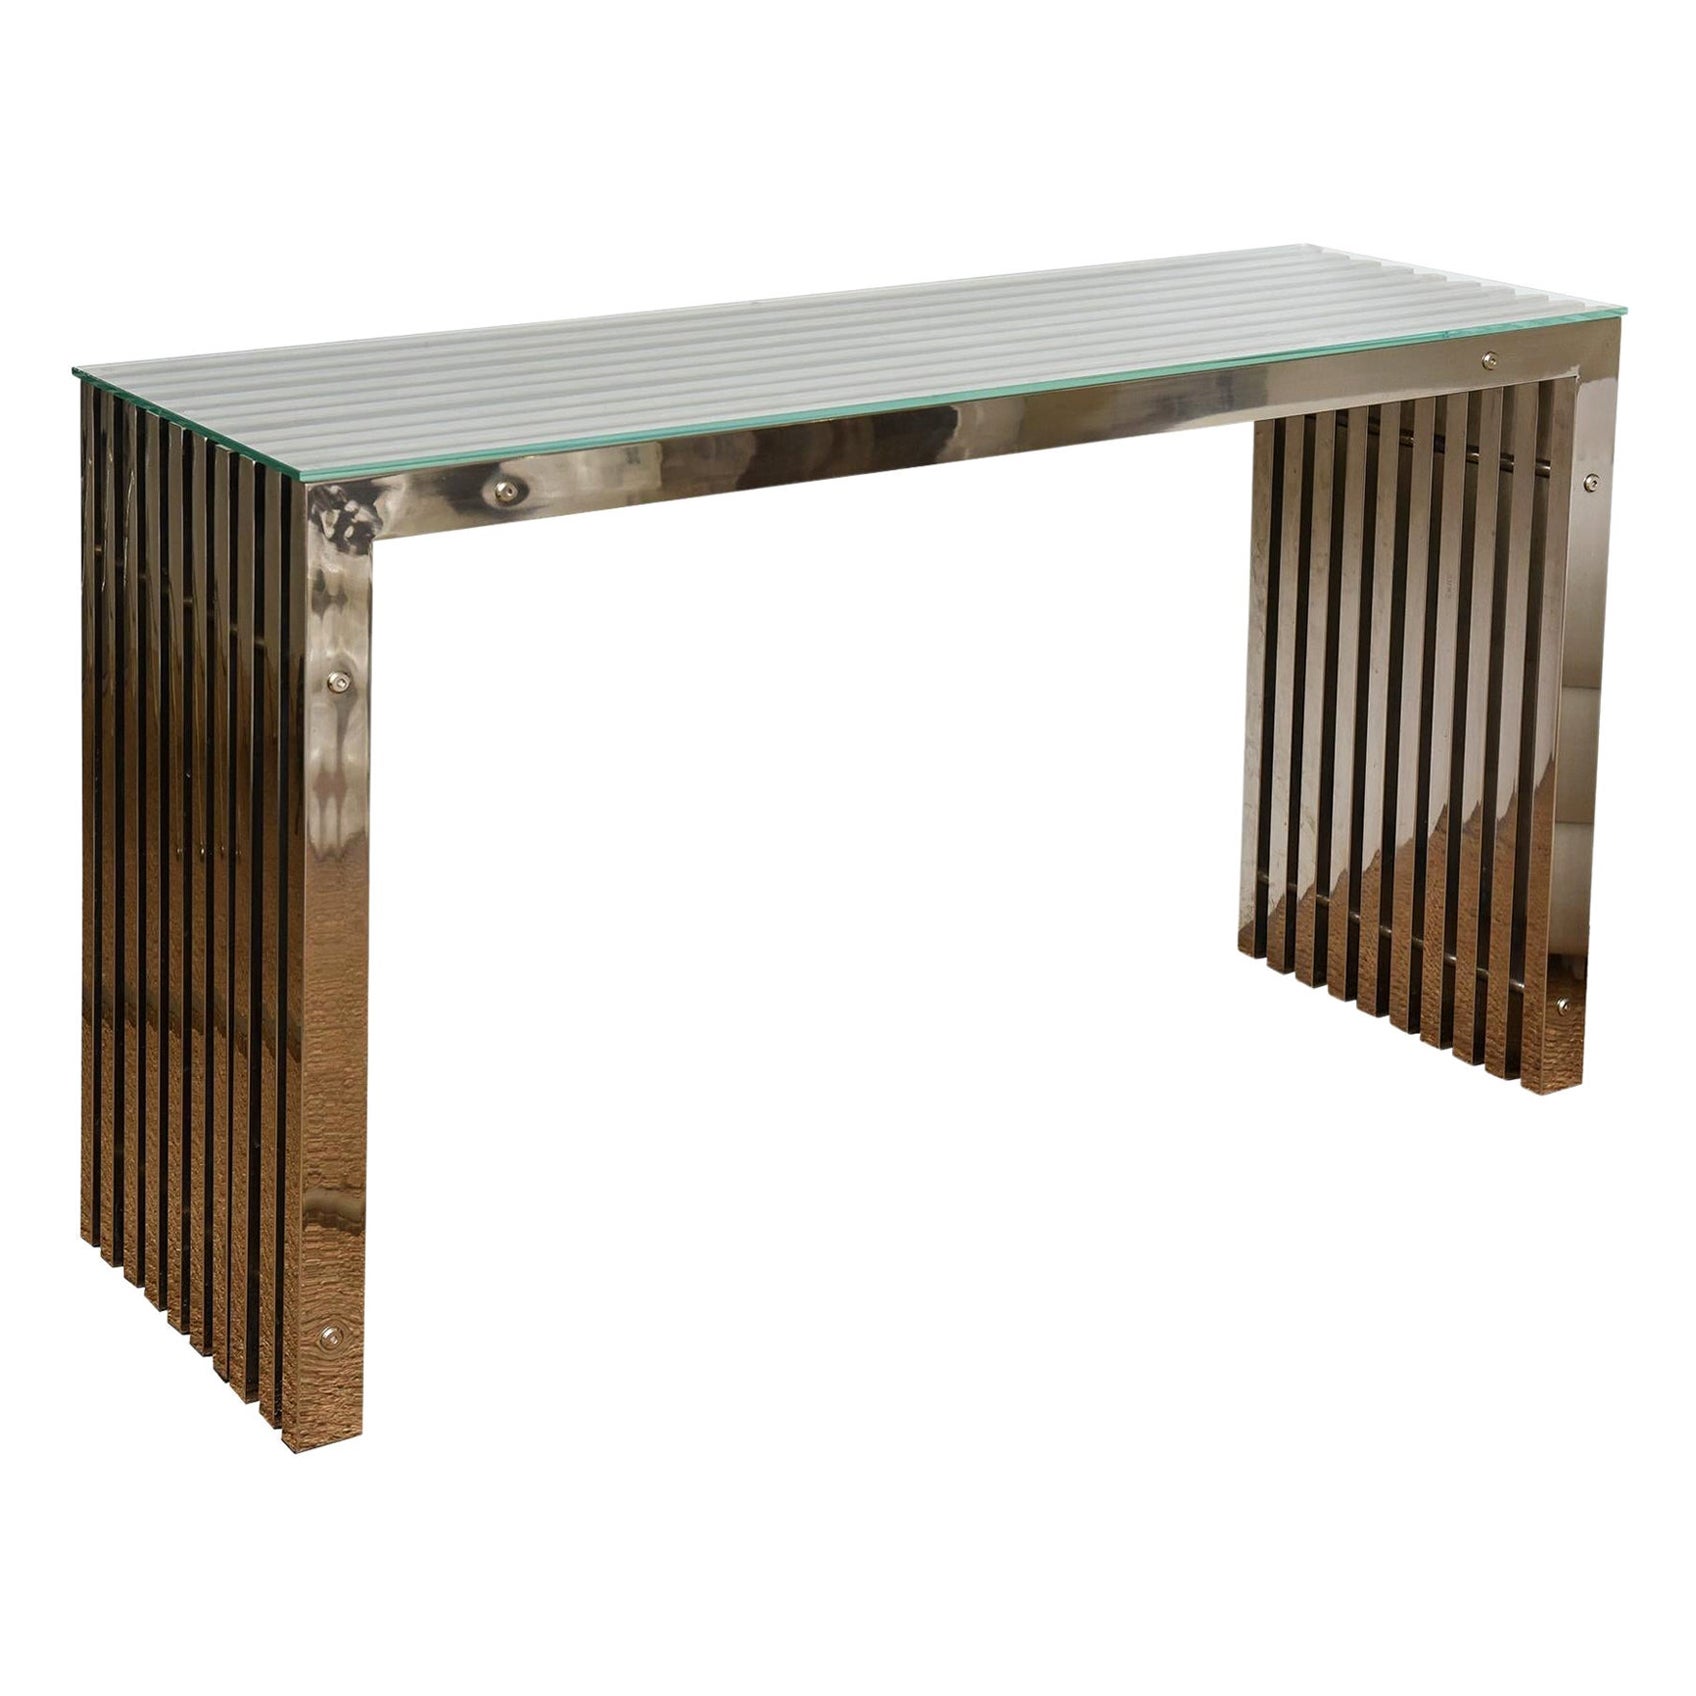 Milo Baughman Style Slated Stainless Steel Console or Sofa Table Vintage